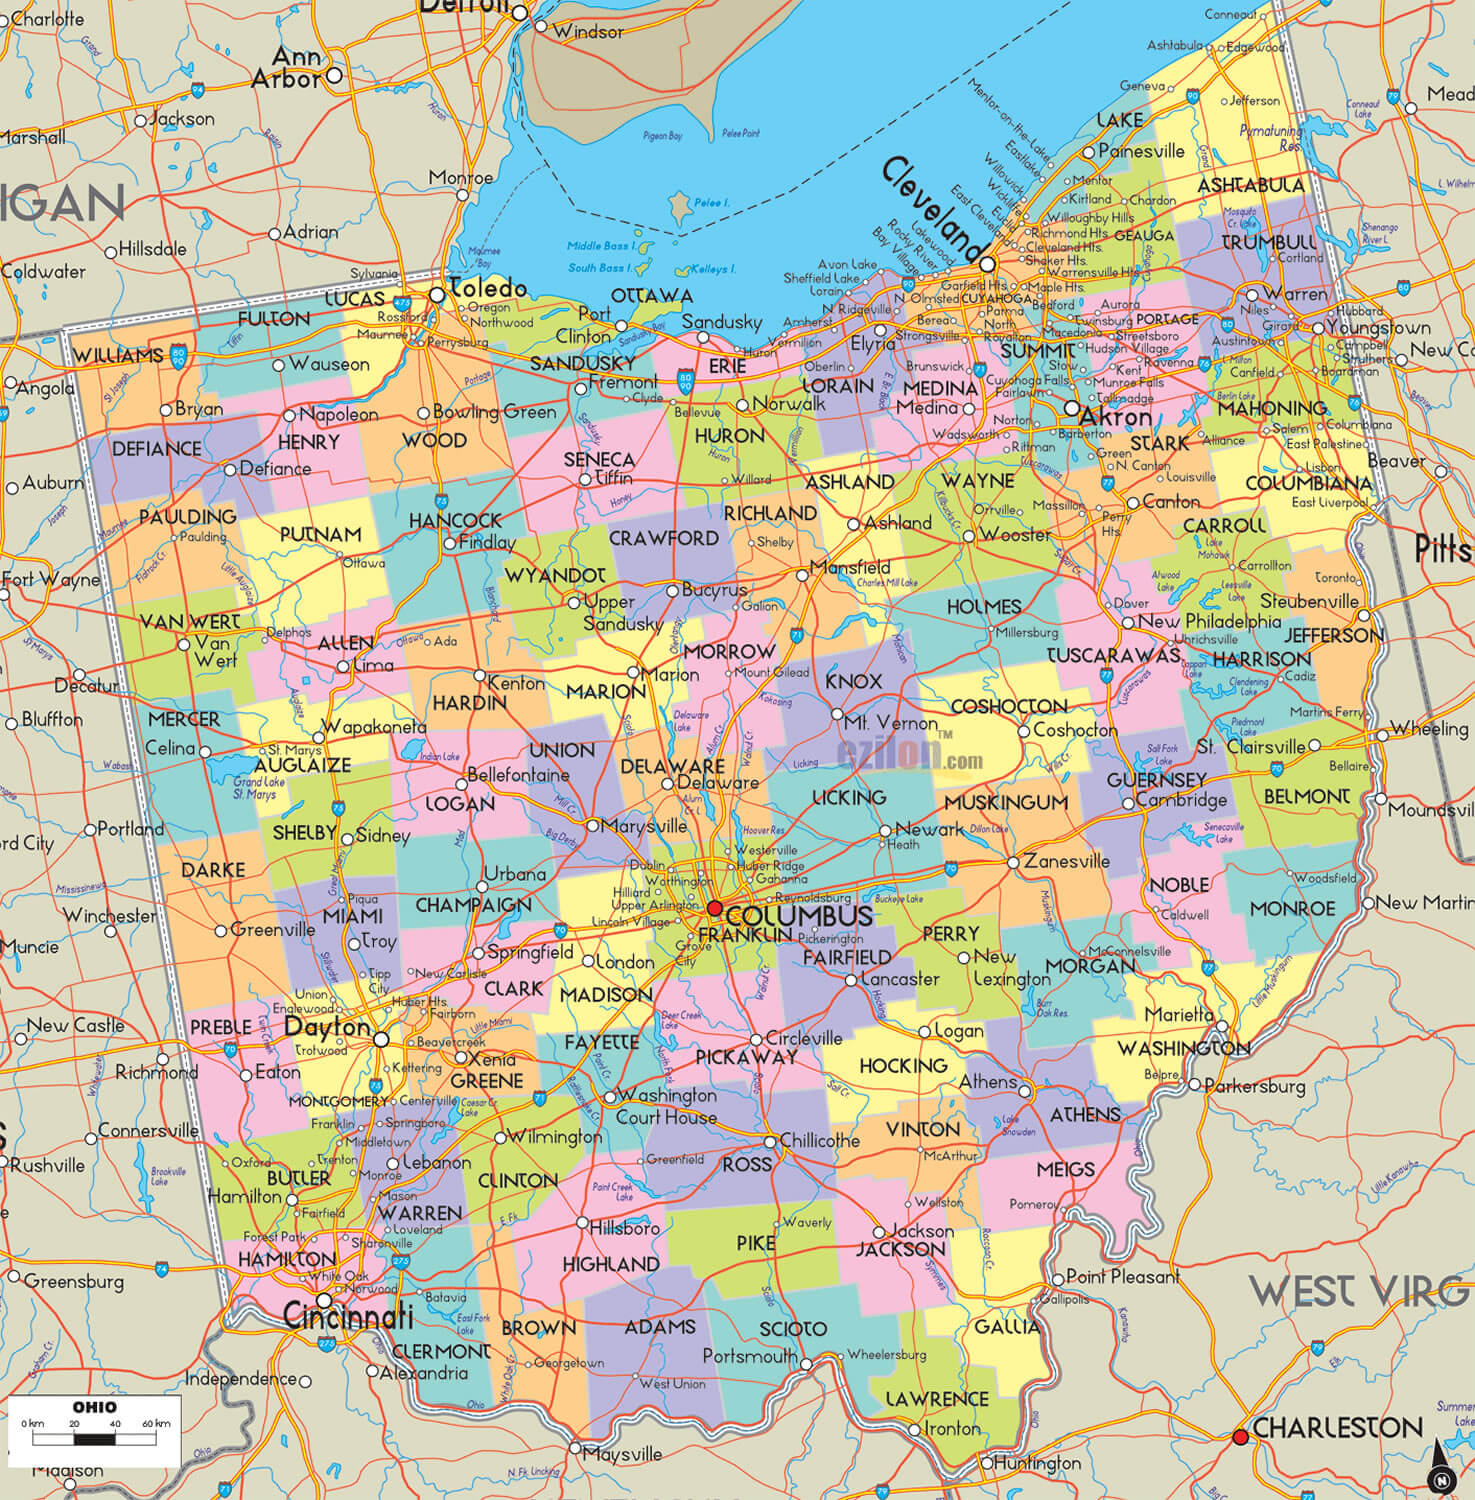 Ohio Counties Road Map USA